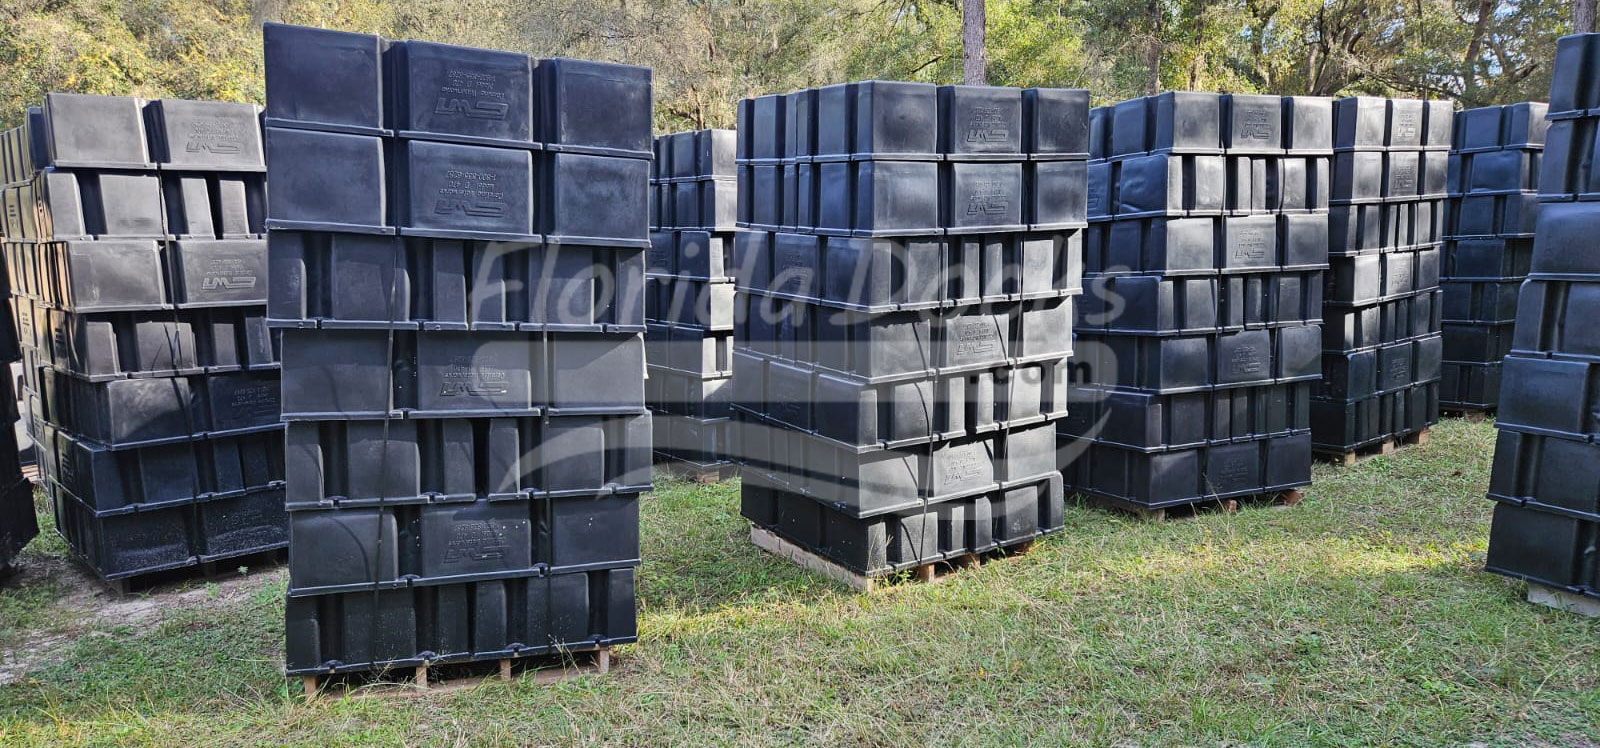 Dock Floats in Saint Augustine - carolina waterworks permafloats quality floating docks pallet pricing and bulk discounts - by Florida Docks 